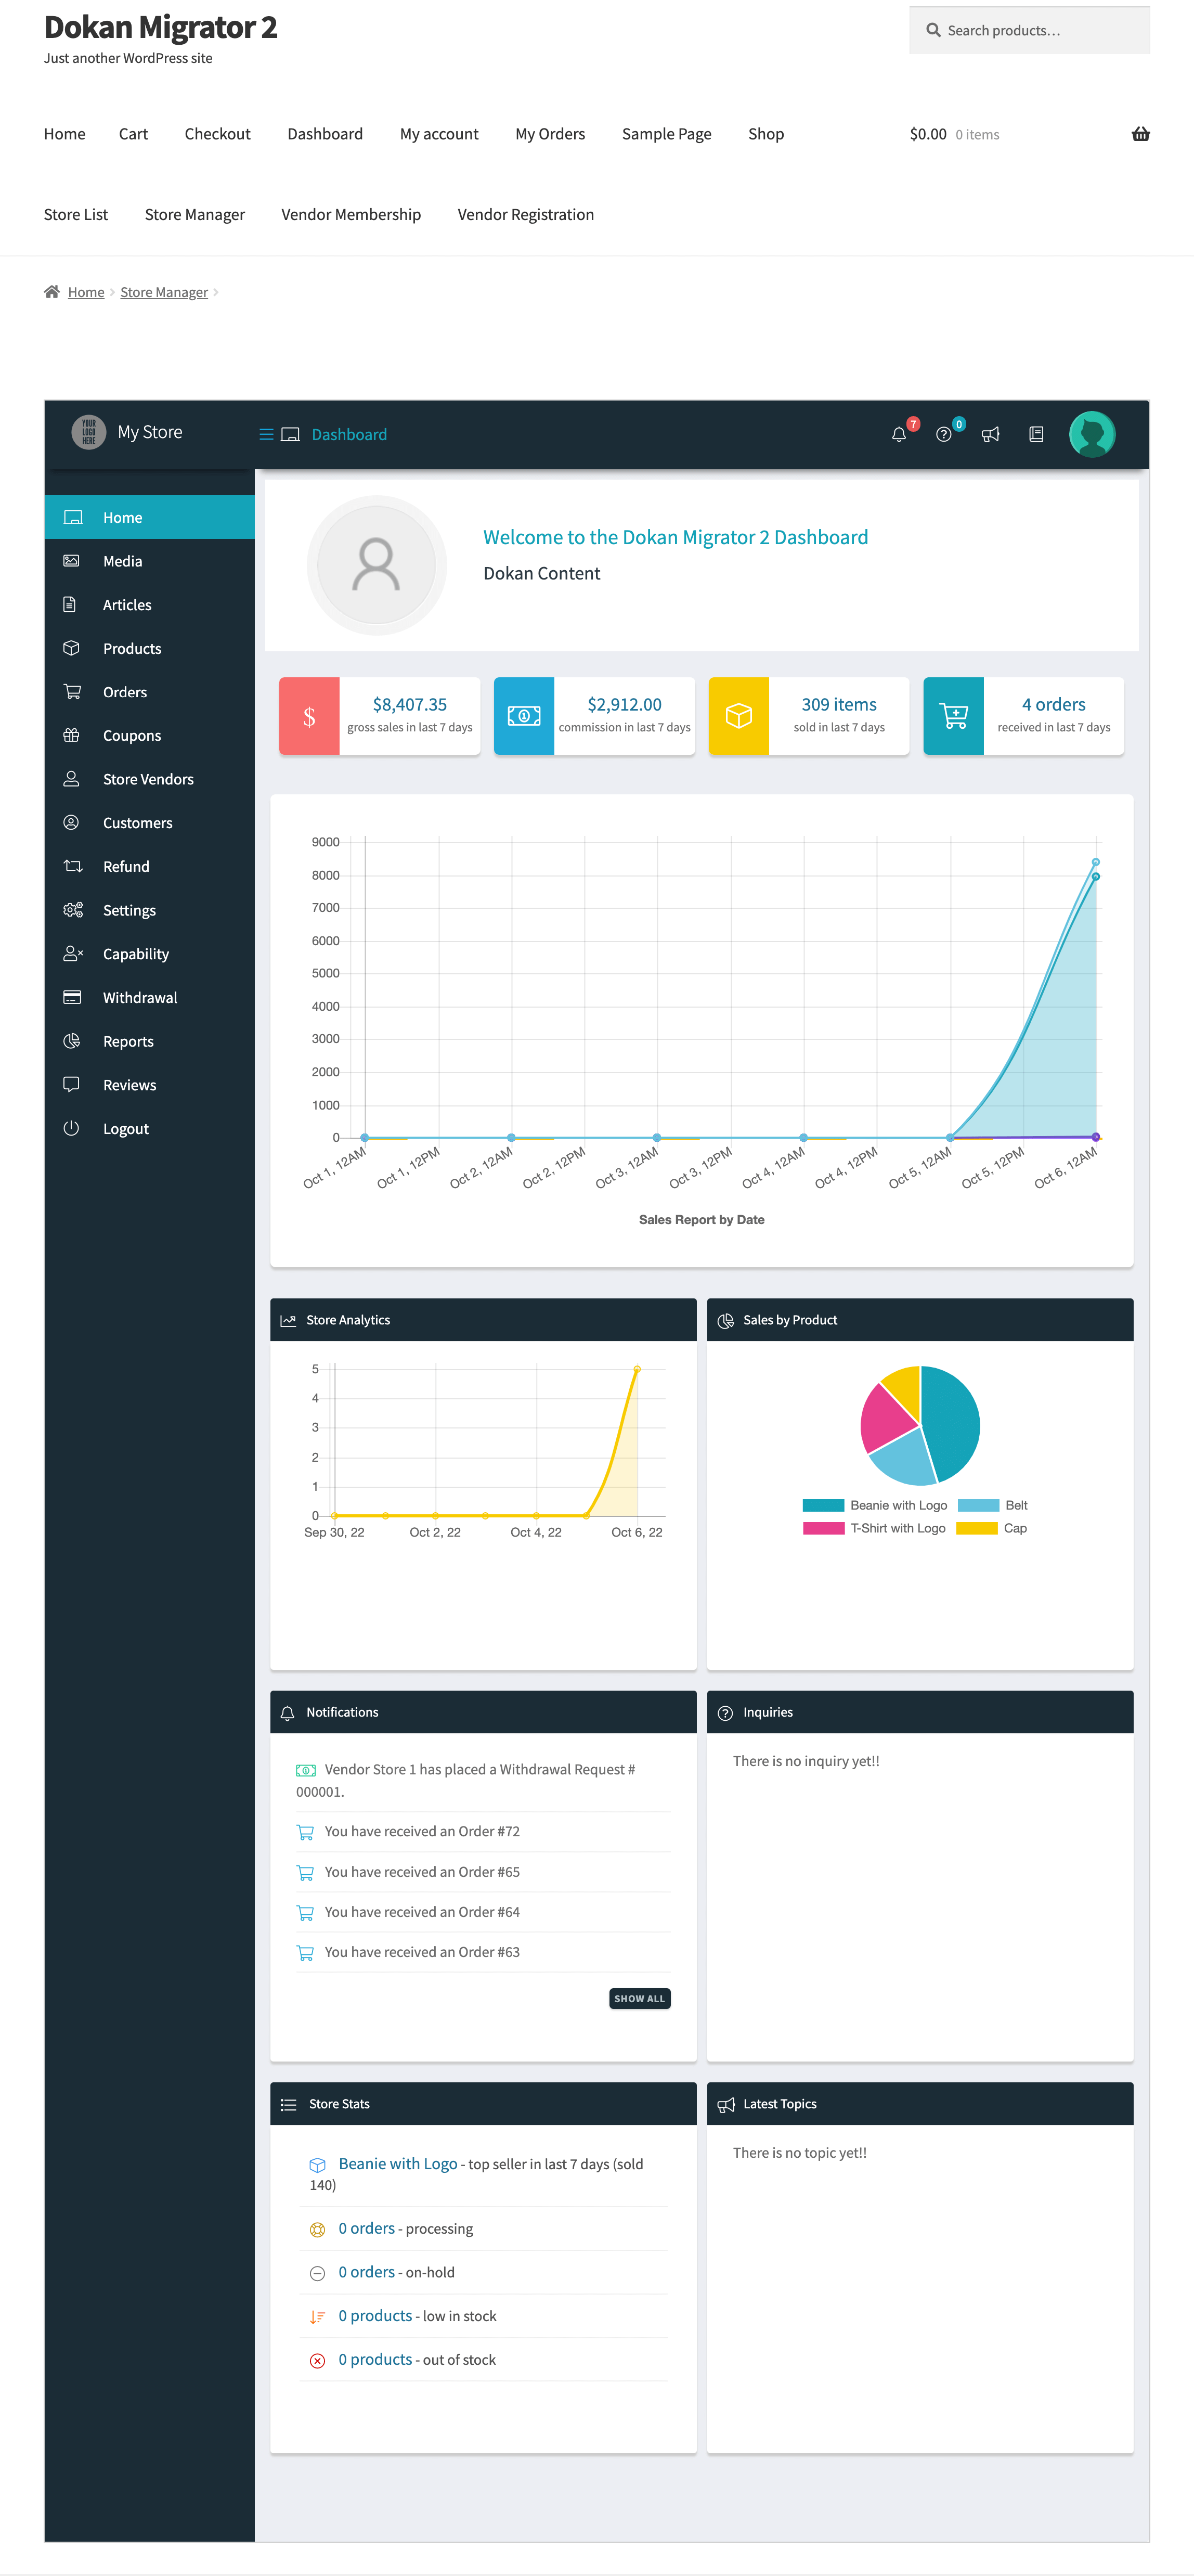 this is a screenshot of WCFM market dashboard